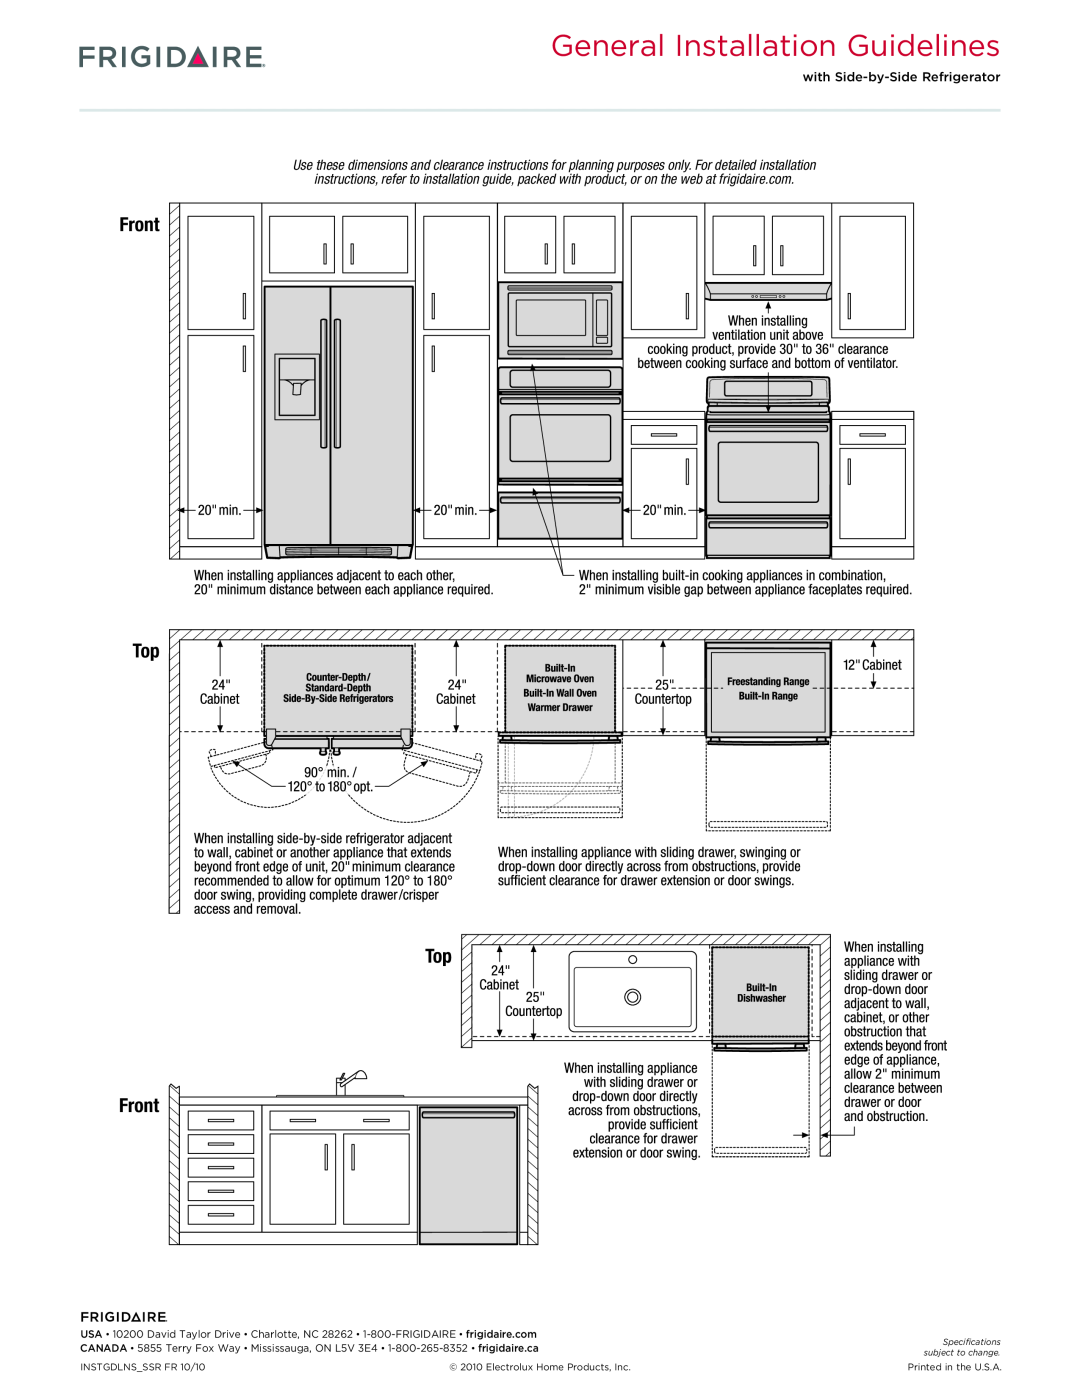 Frigidaire FGGS3065K dimensions General Installation Guidelines, Top Front 